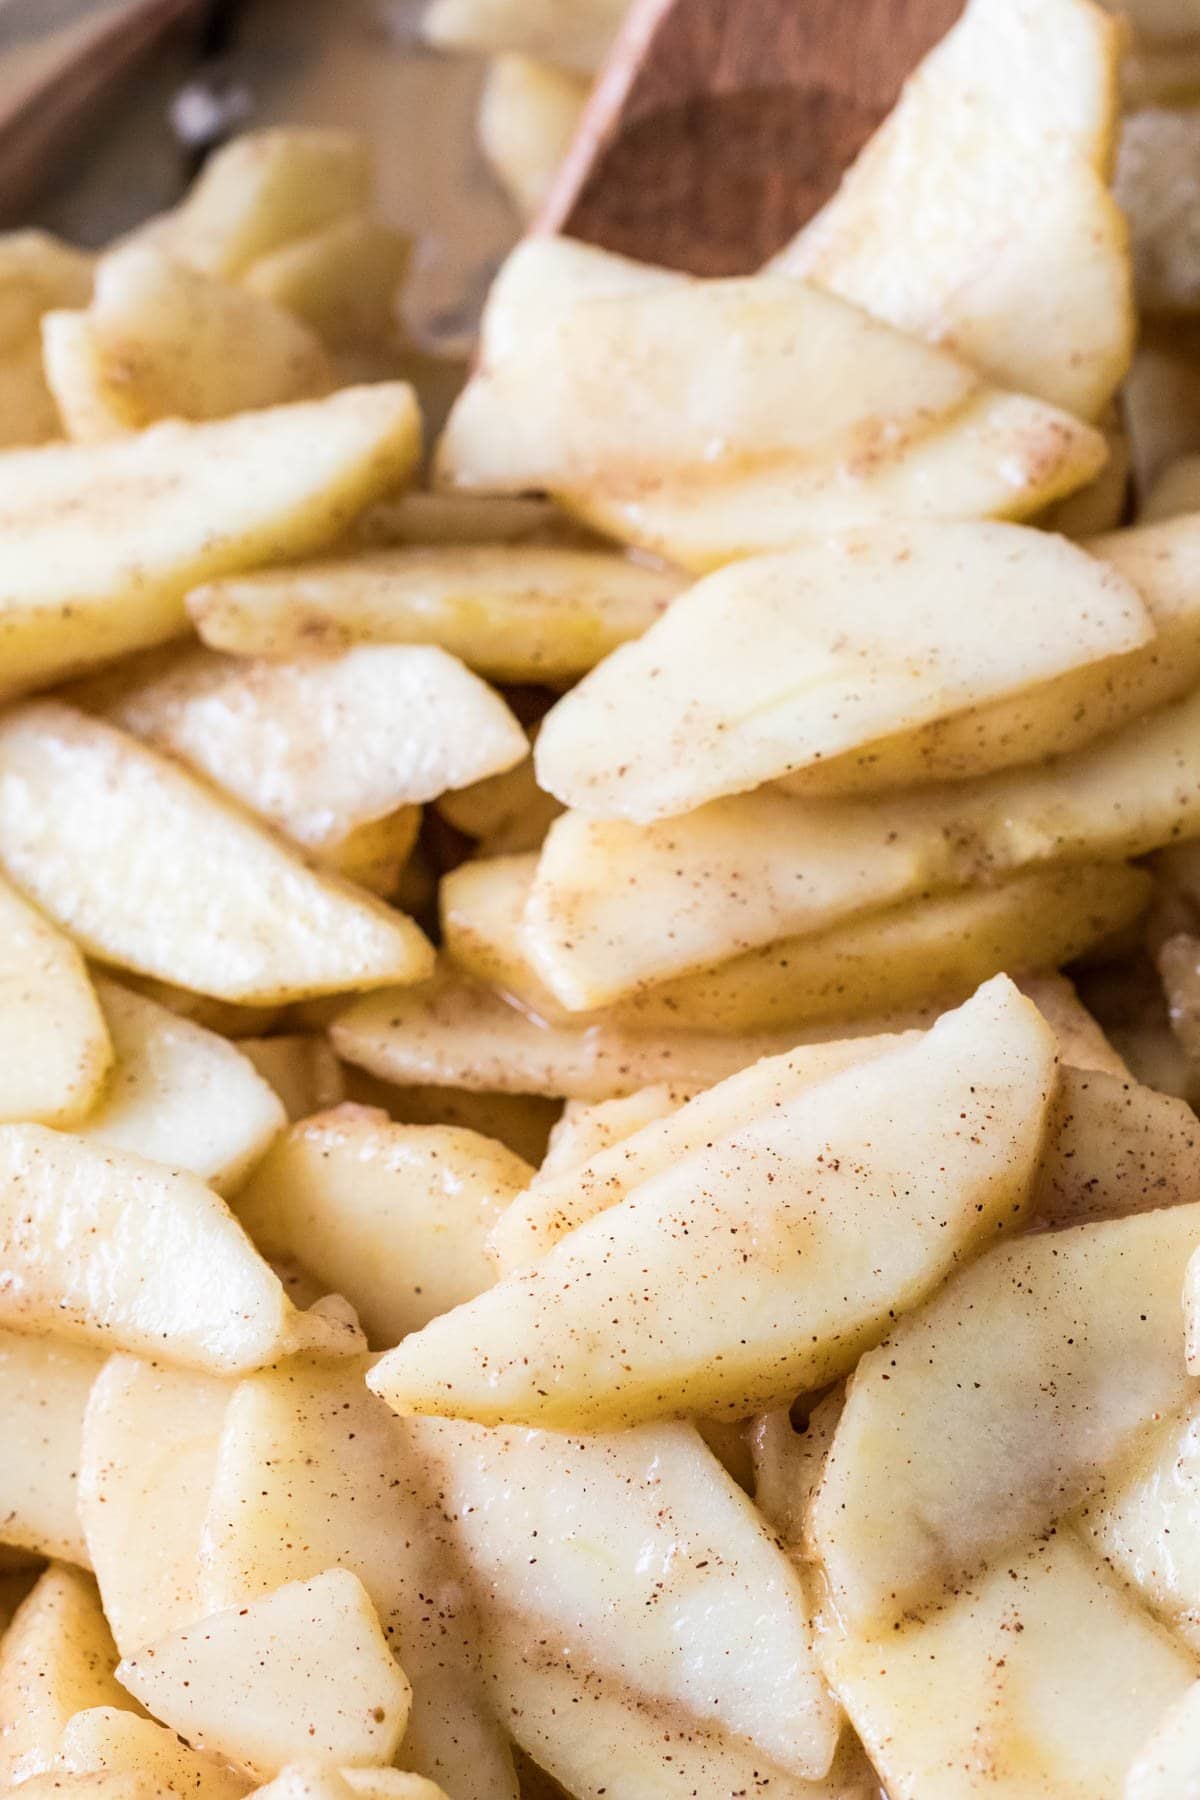 Close-up view of apple slices tossed in sugar, lemon juice and cinnamon.